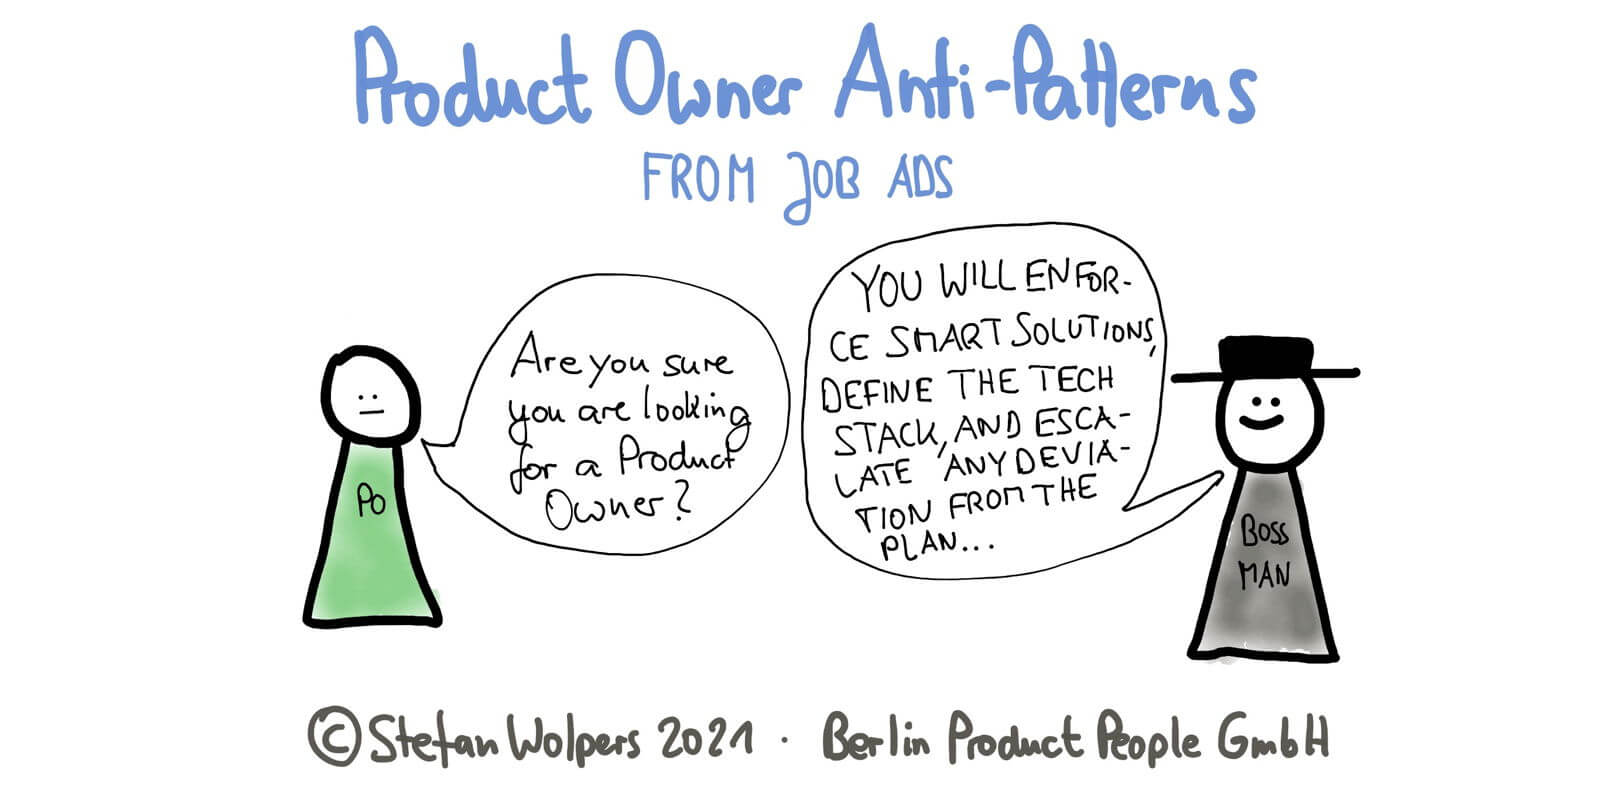 23 Product Owner Anti-Patterns from Job Ads: The Snitch, the Whip, the Bookkeeper, the Six Sigma Black Belt™ — Age-of-Product.com